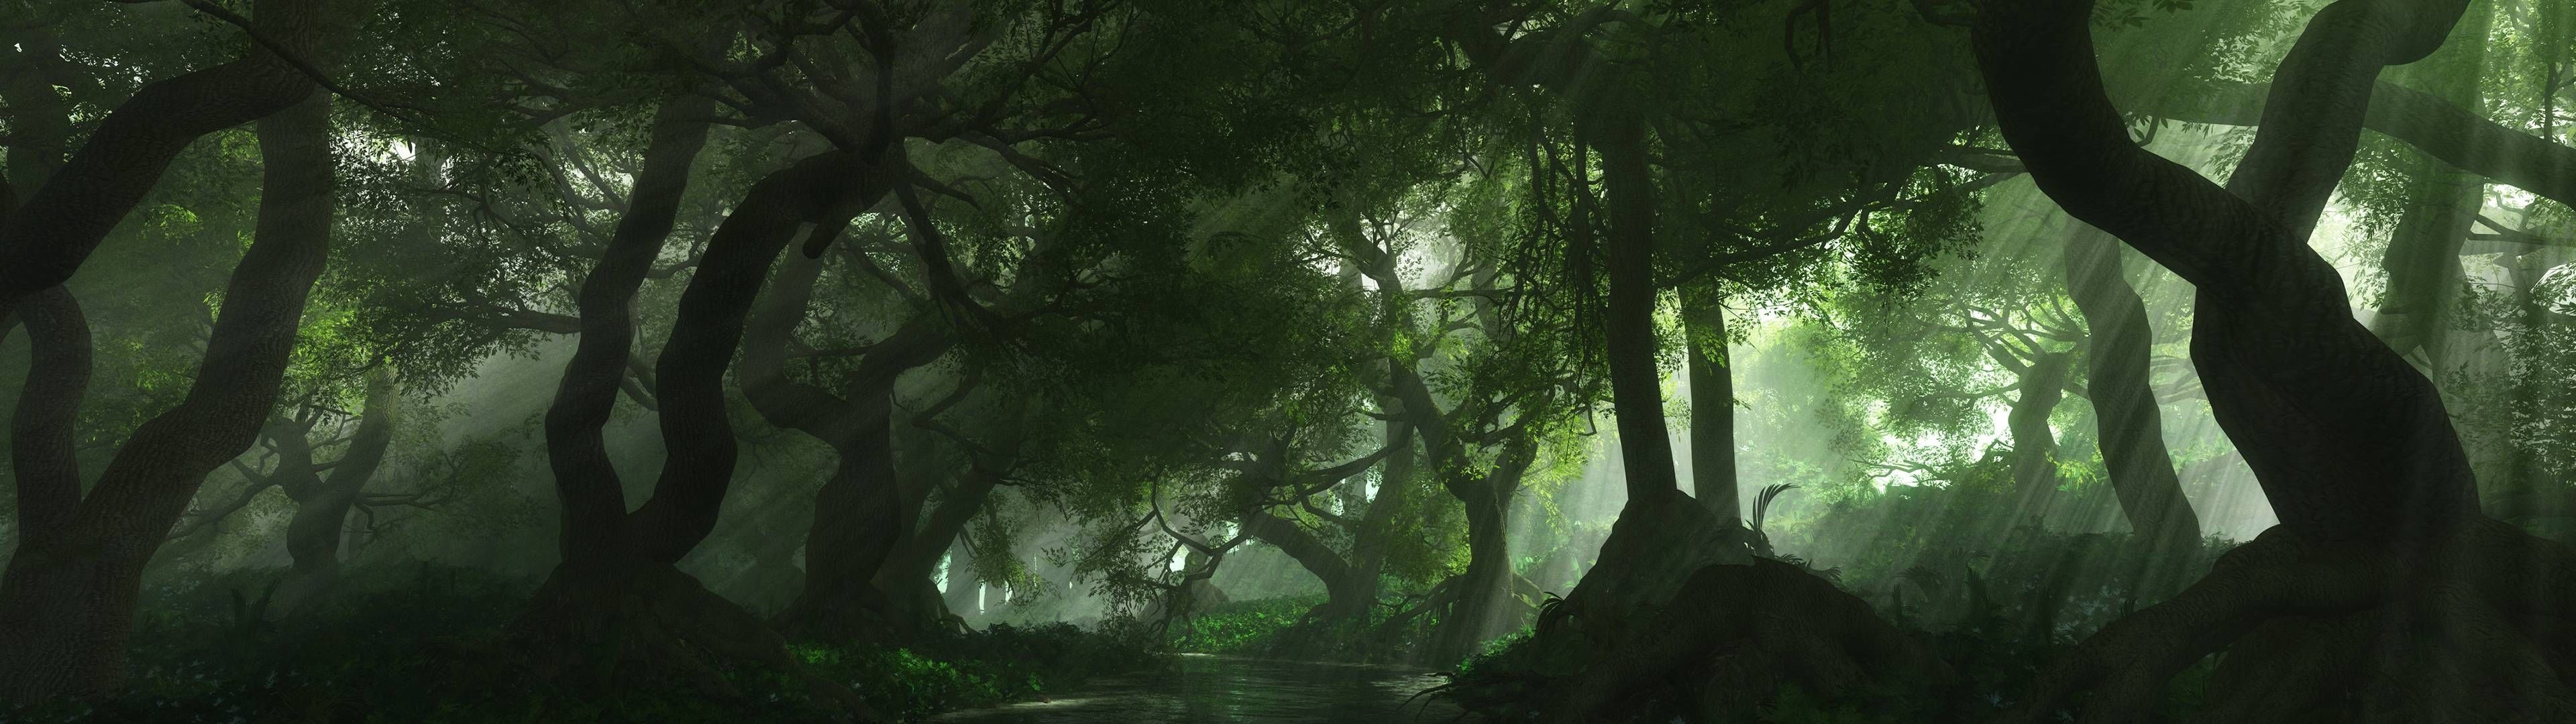 Green Forest: Any land that is used primarily for production of timber. 3840x1080 Dual Screen Wallpaper.